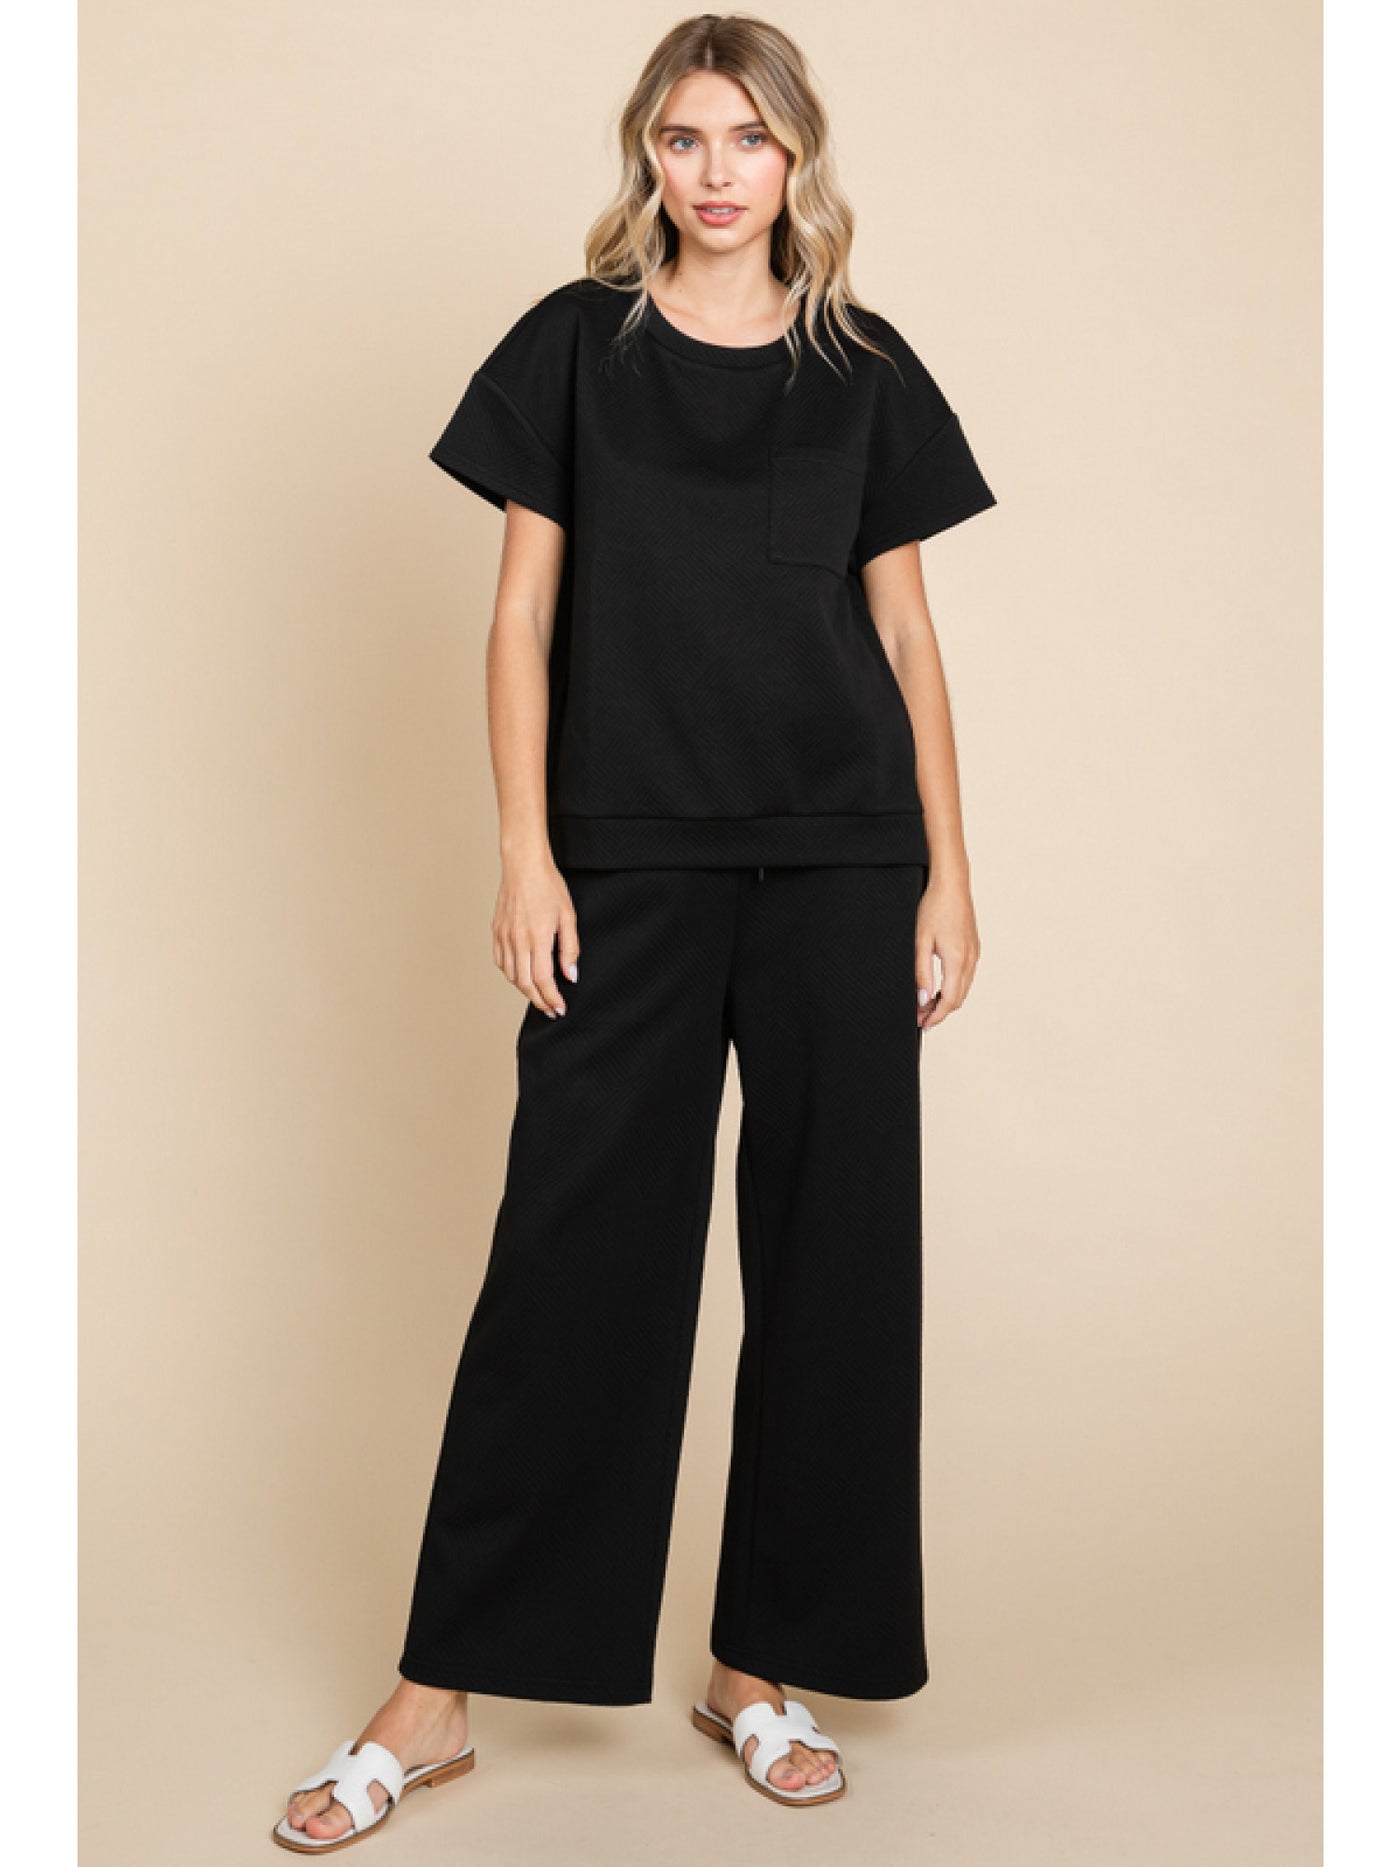 Black Textured Top w/ Breast Pocket and Pants w/ Pockets Set